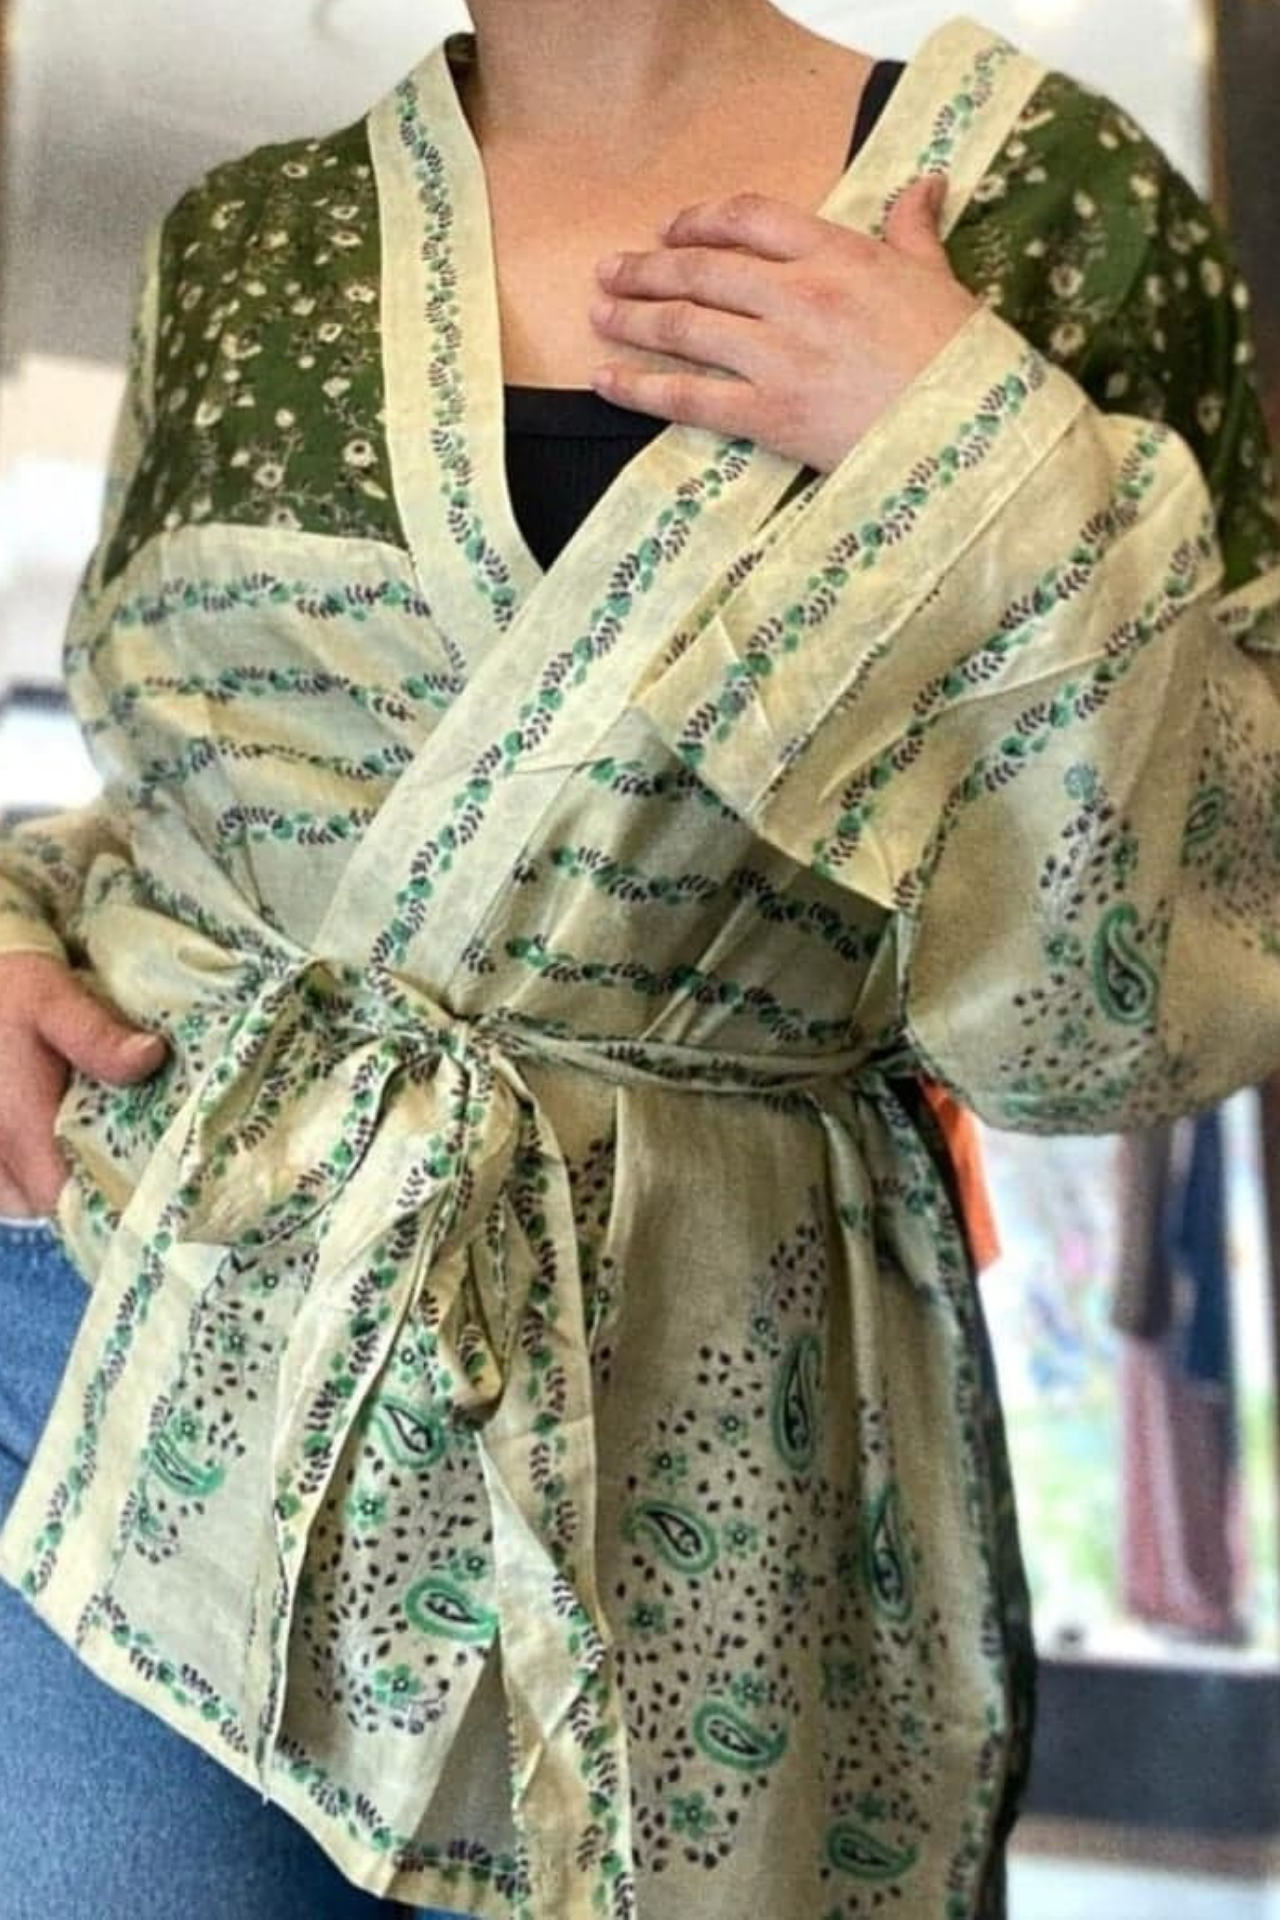 The subject is a womans torso wearing a green and off white floral/paisley kimono jacket made from vintage sari silk. the jacket is crossed across her abdomen and tied around the waist with a matching off white, green paisley tie. the woman is wearing a simple black tshirt and blue jeans underneath